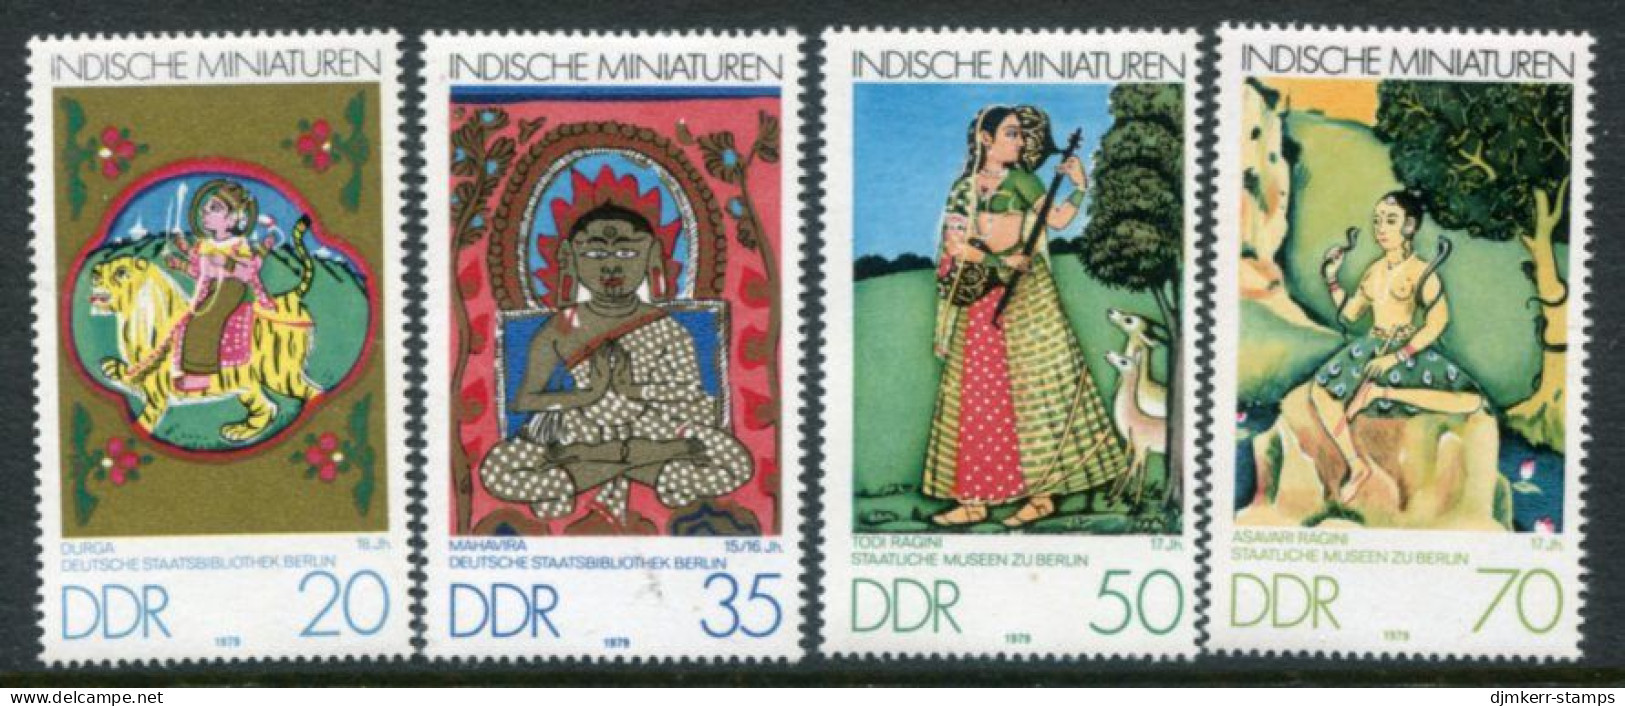 DDR / E. GERMANY 1979 Indian Miniatures MNH / **.  Michel  2418-21 - Nuevos